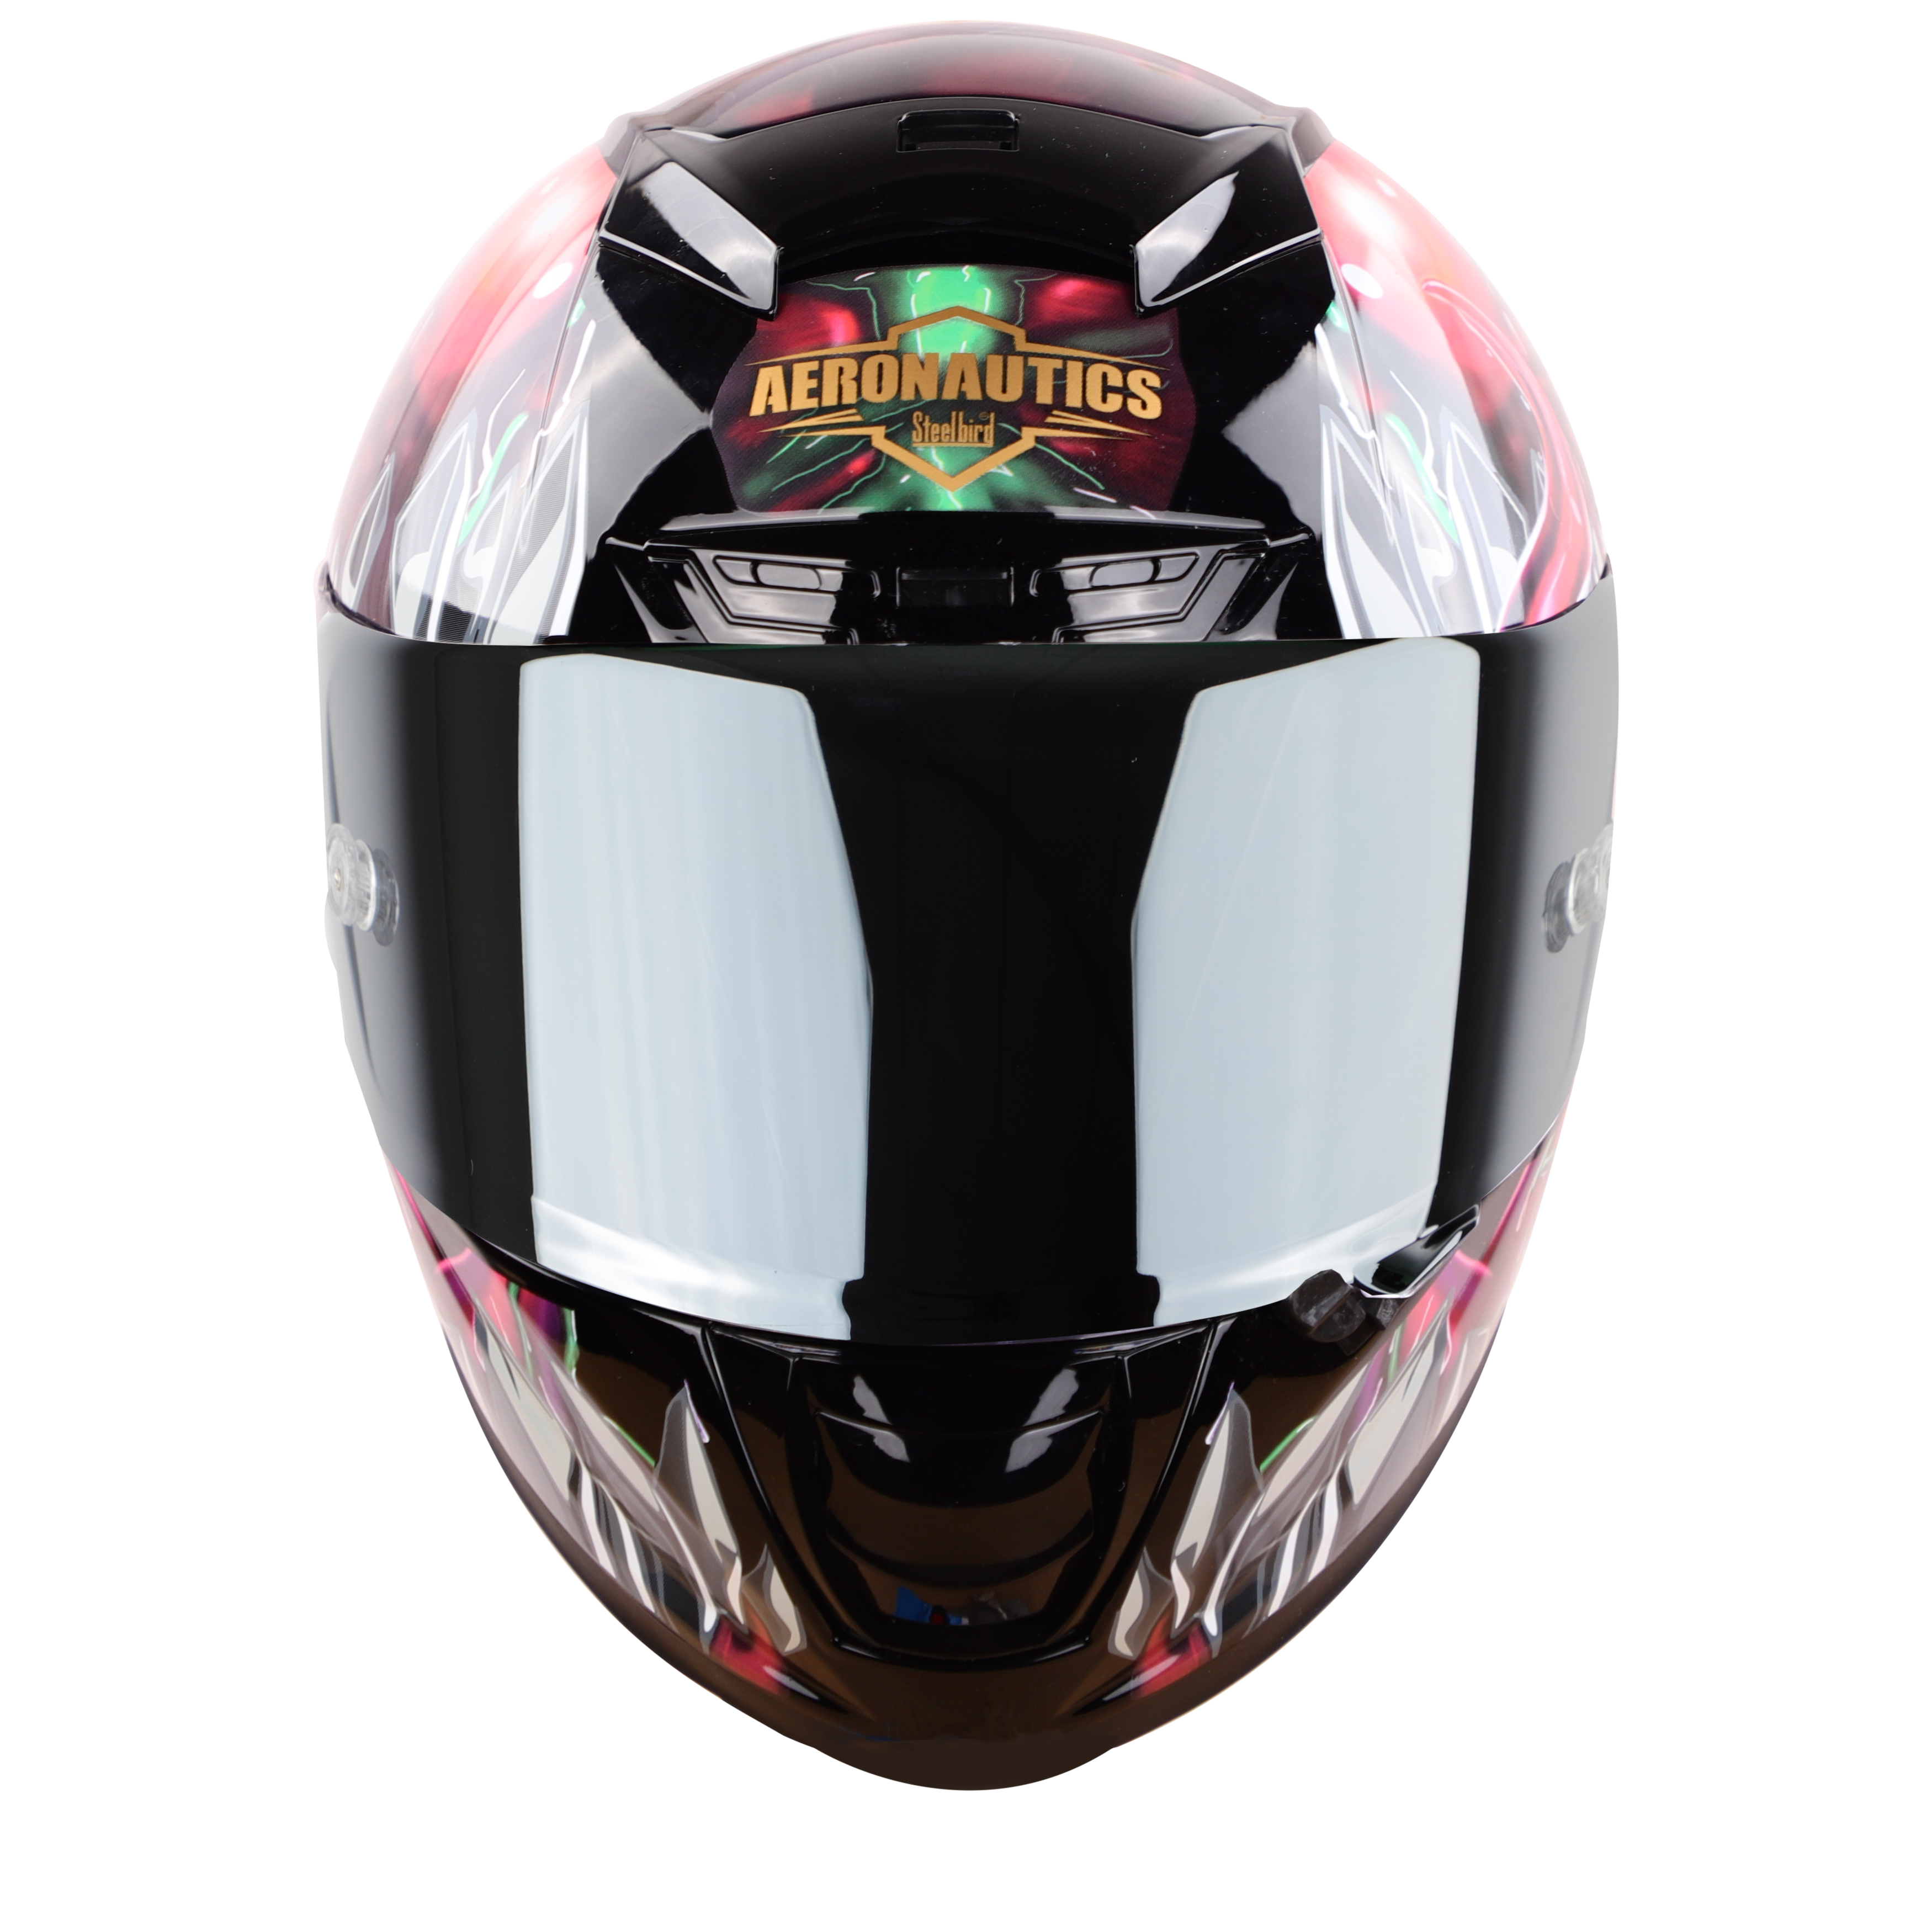 SA-2 FANTASY GLOSSY BLACK WITH GREY (FITTED WITH CLEAR VISOR EXTRA SILVER CHROME VISOR FREE & WITH ANTI-FOG SHIELD HOLDER)